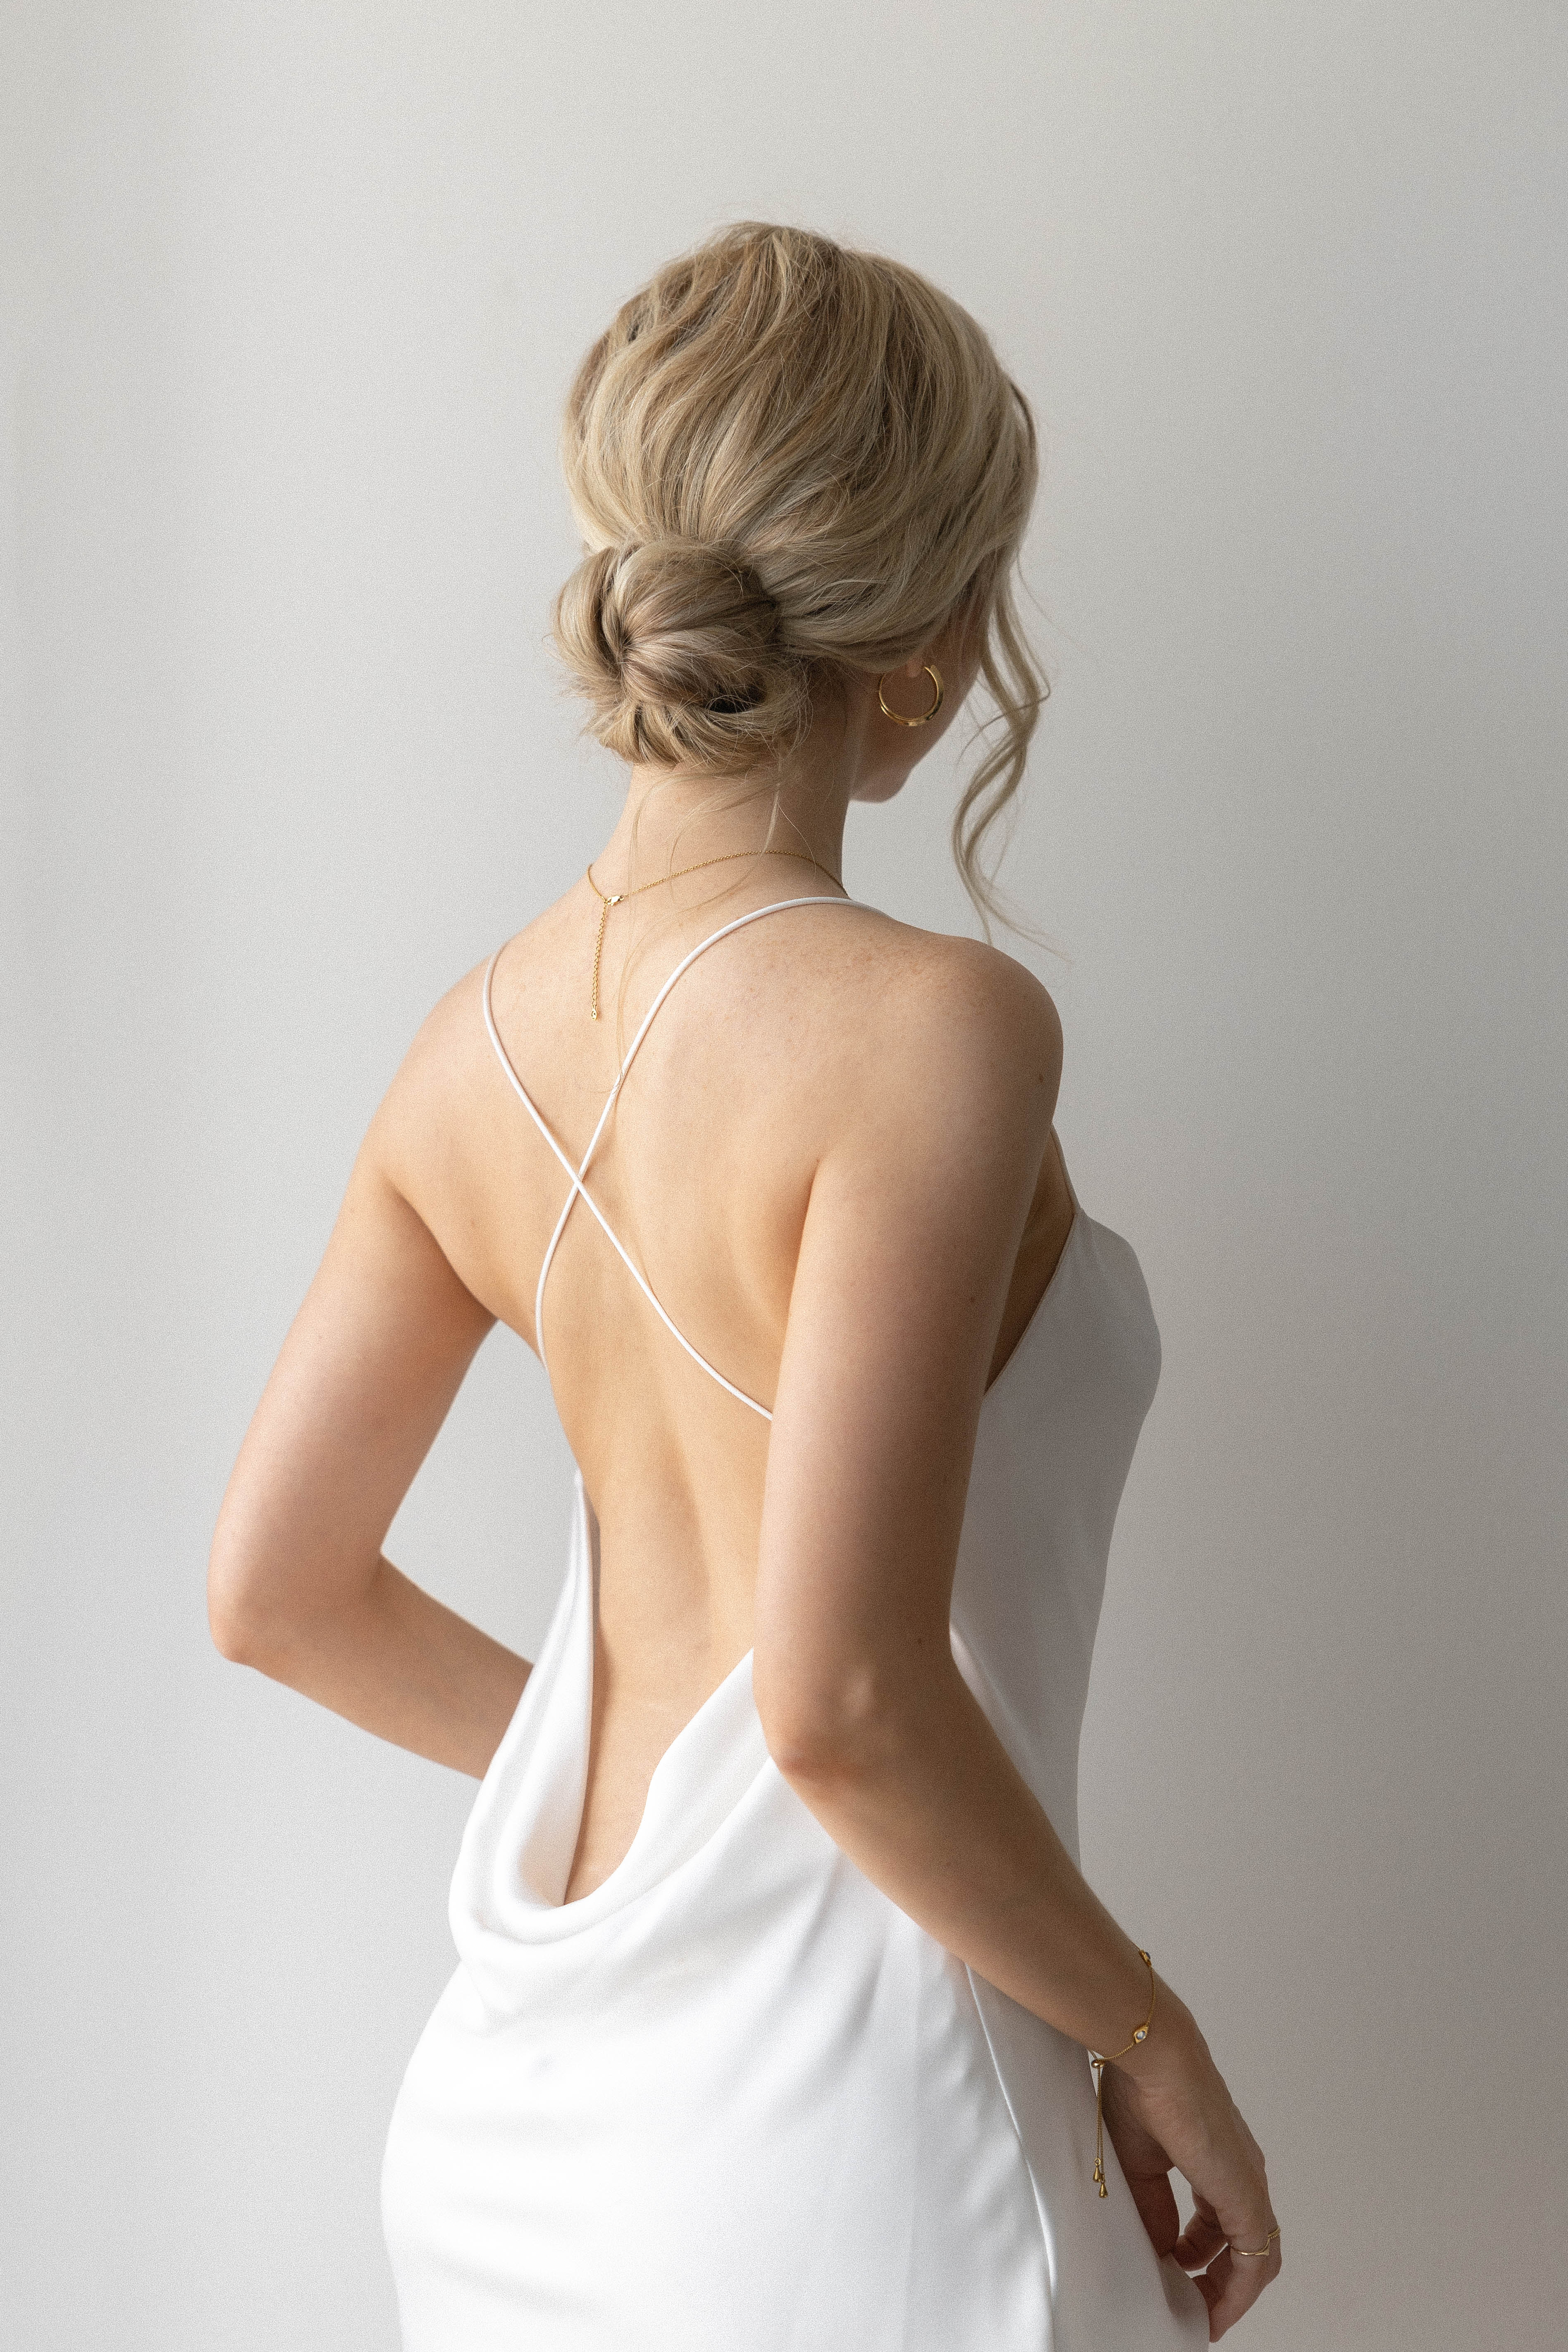 Hairstyle ideas for long hair and a lowback dress  rweddingplanning